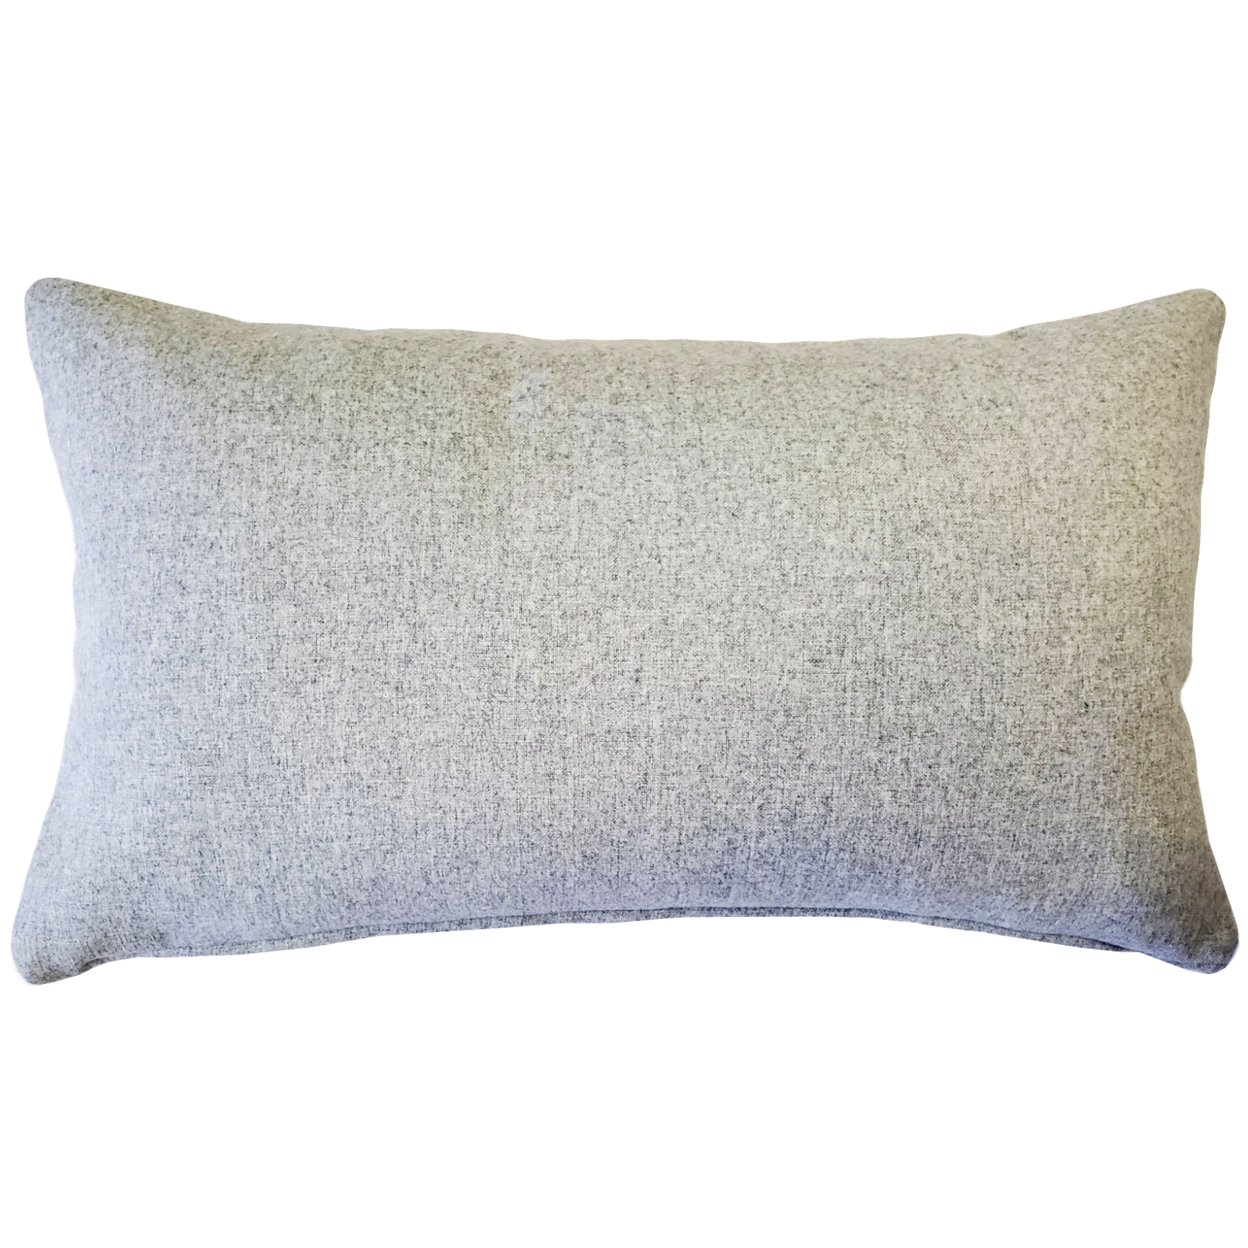 Boketto Paradiso Blue Throw Pillow 12x19 Inches Square, Complete Pillow With Polyfill Pillow Insert